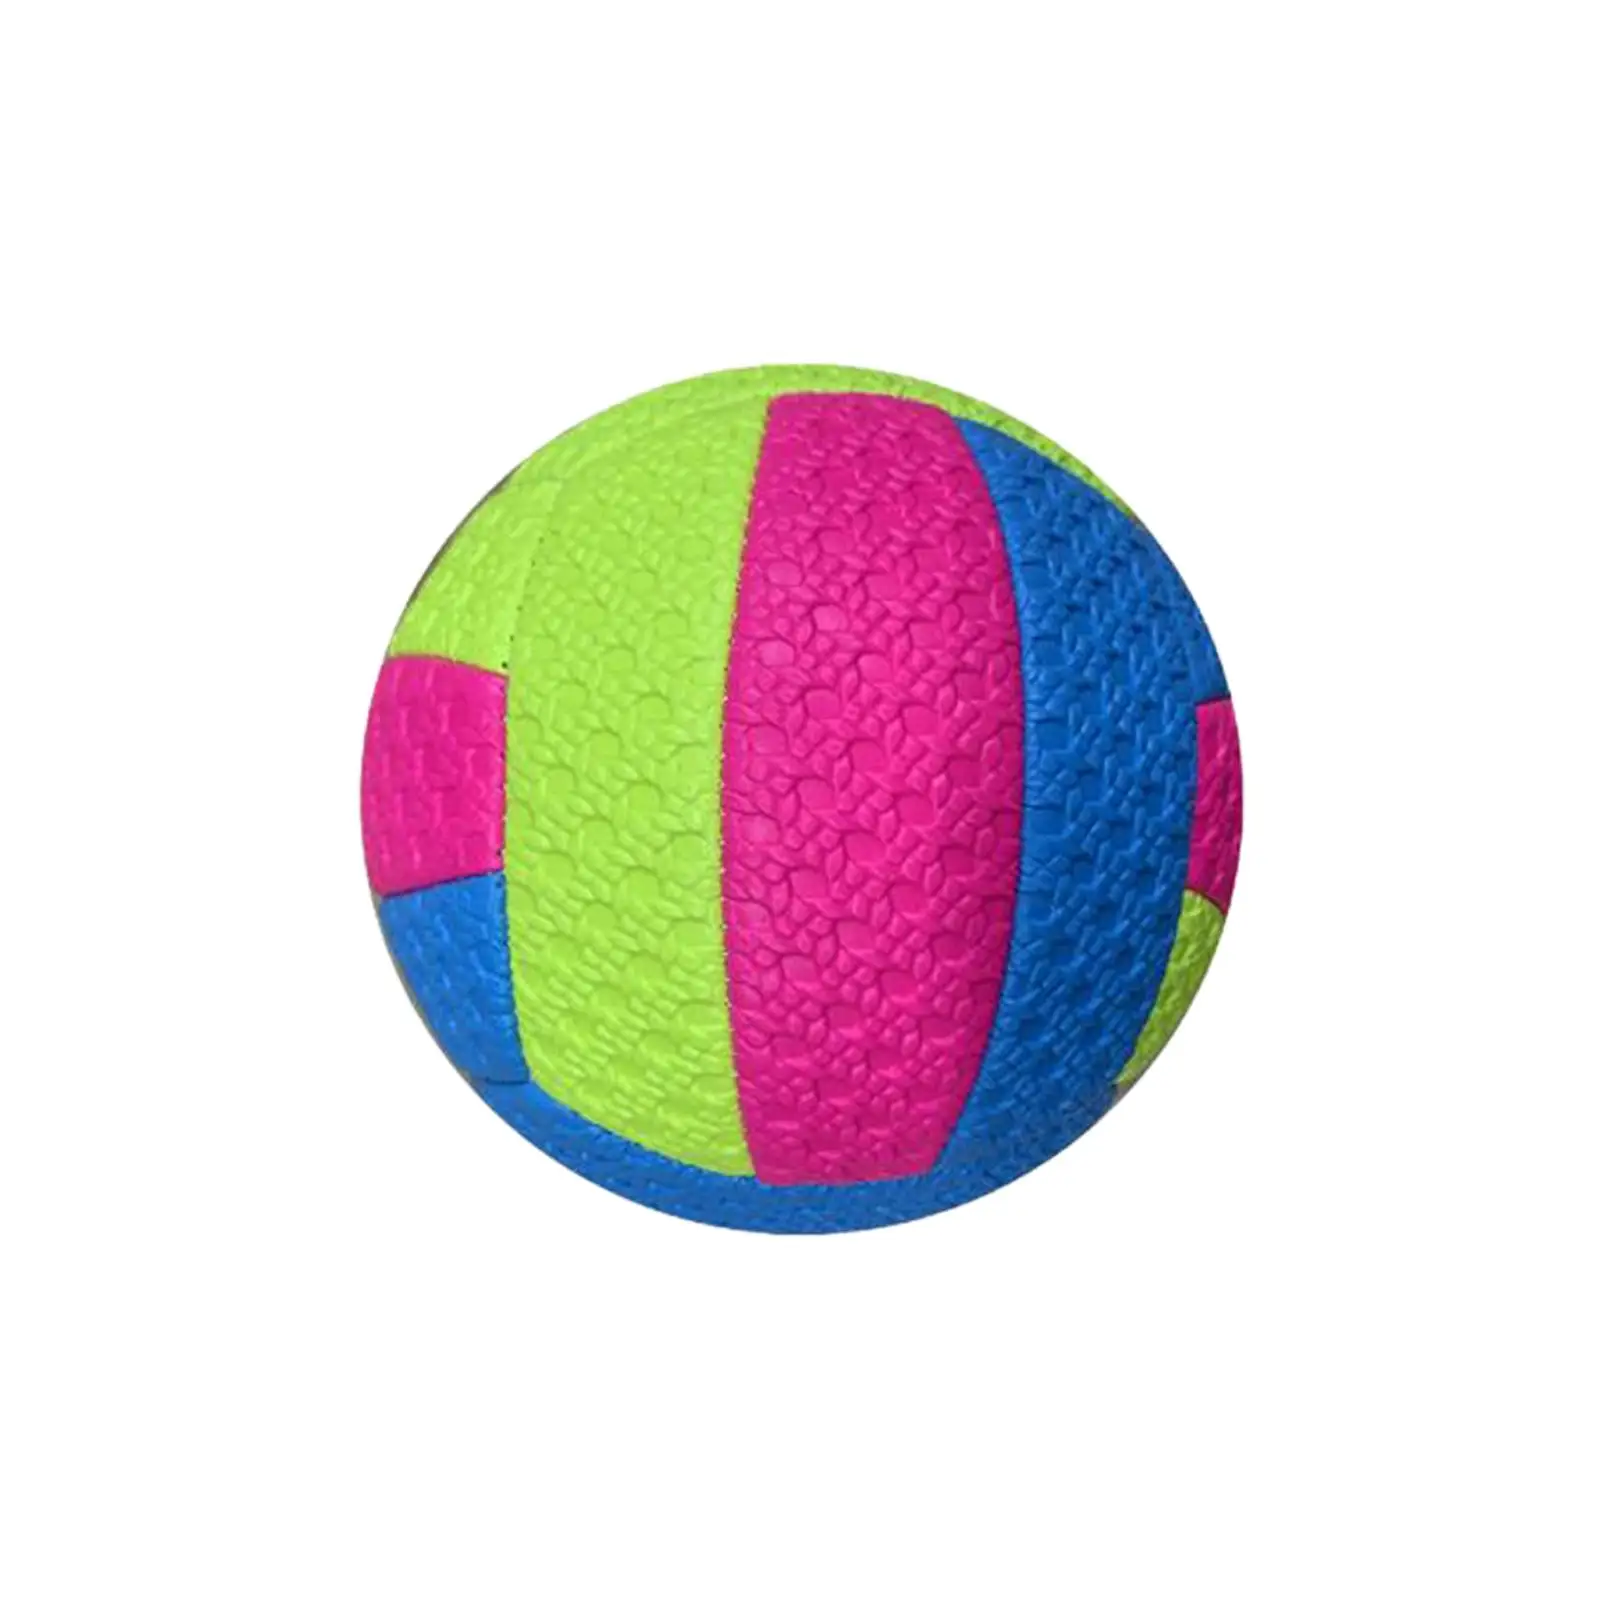 Volleyball Size 2 Training Practice Volley Ball for Kids, 5.9inch Child Toy for Backyard